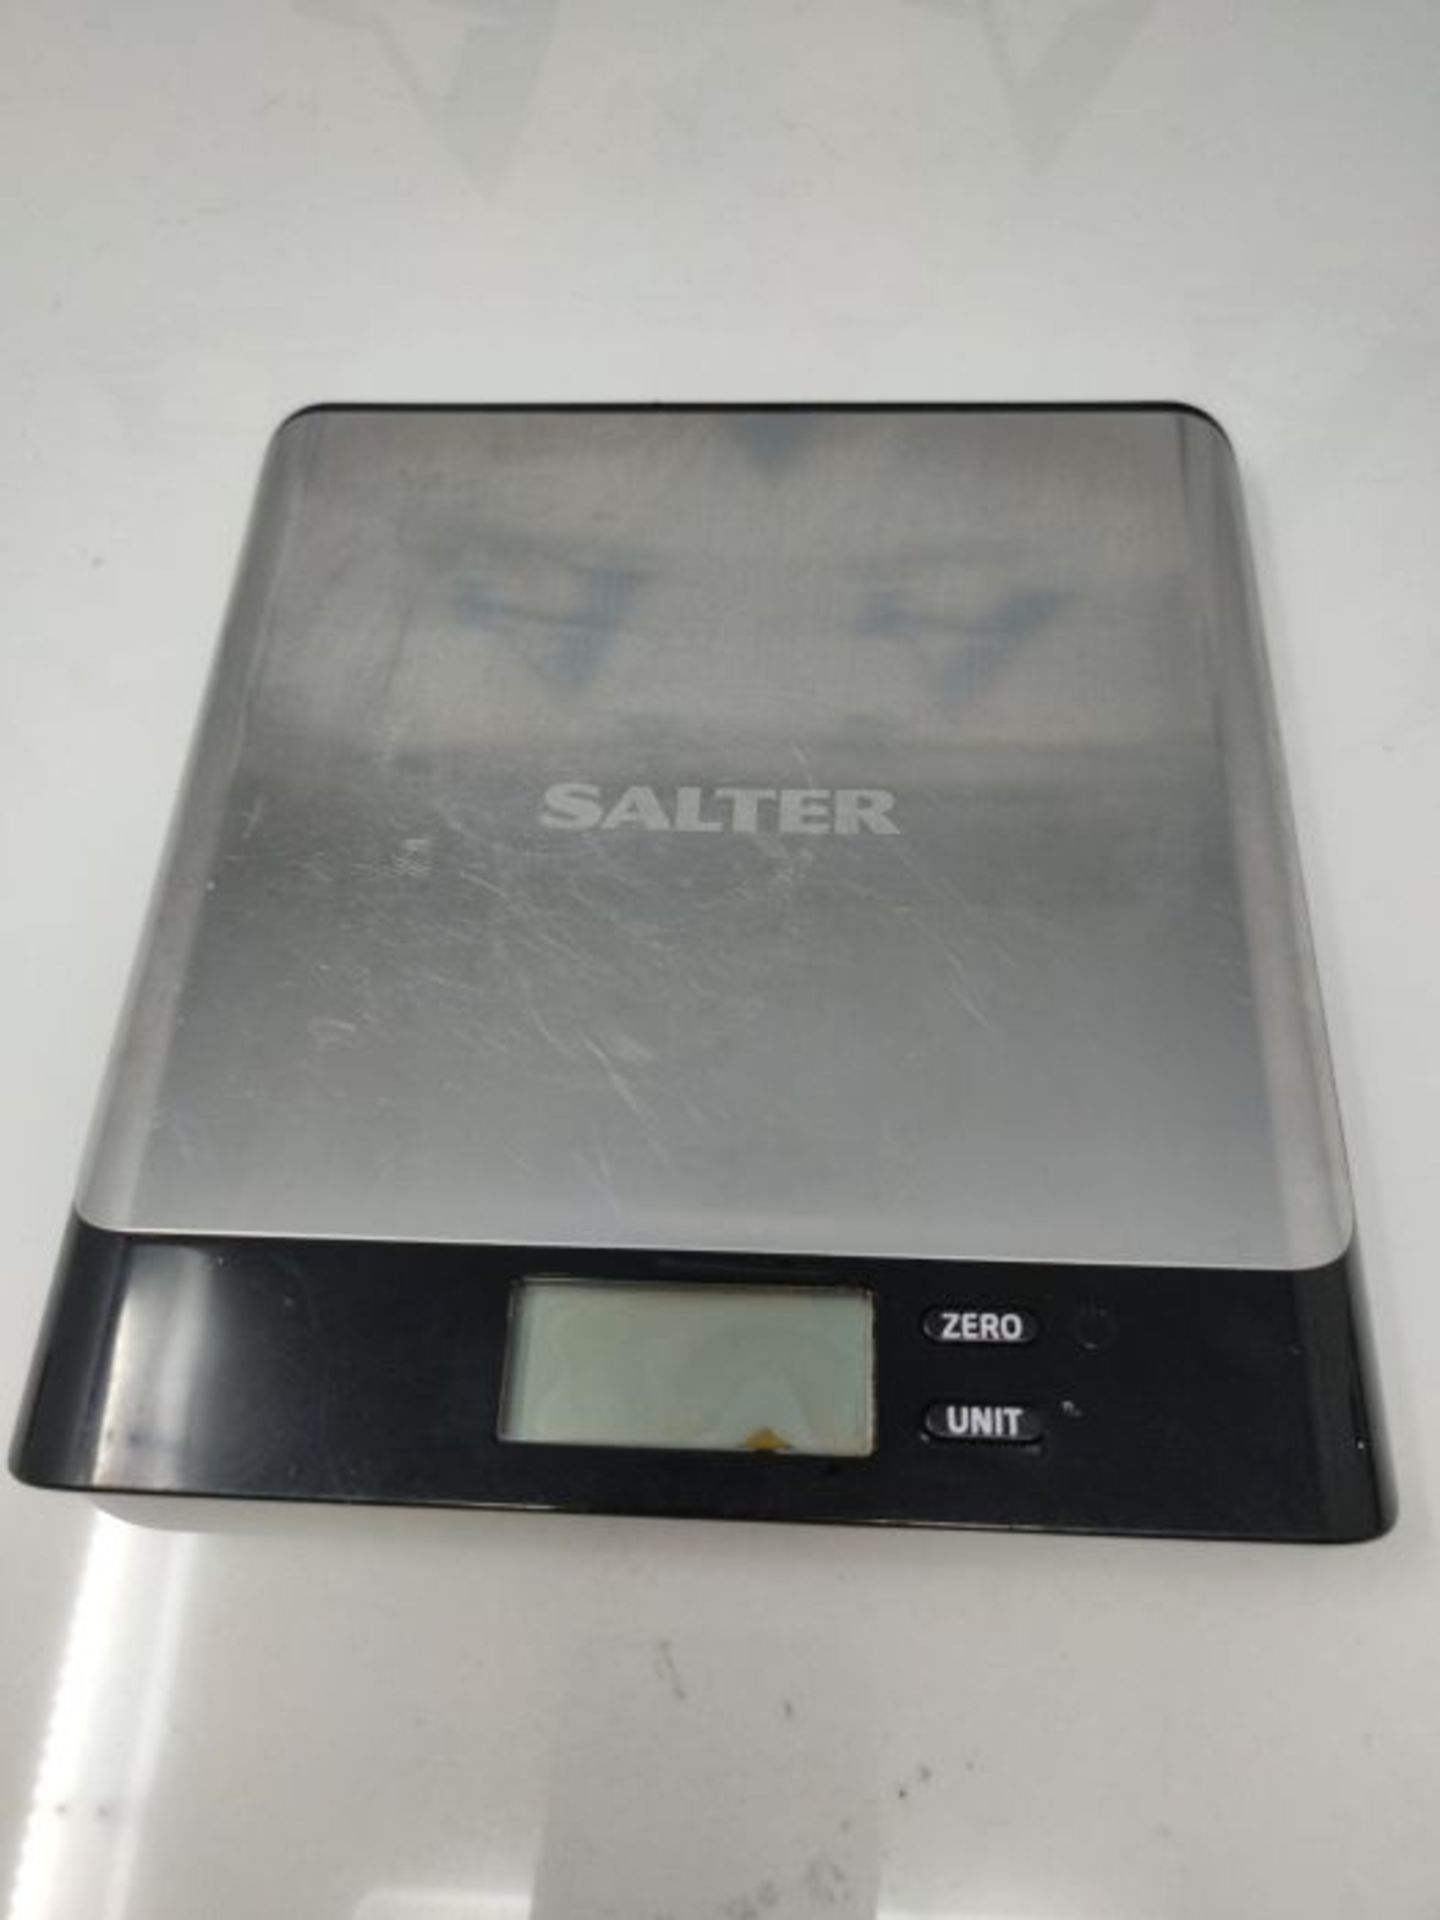 Salter 1052A SSBKDR Arc Pro Stainless Steel Kitchen Scale, Compact, 5 kg Max Capacity, - Image 3 of 3